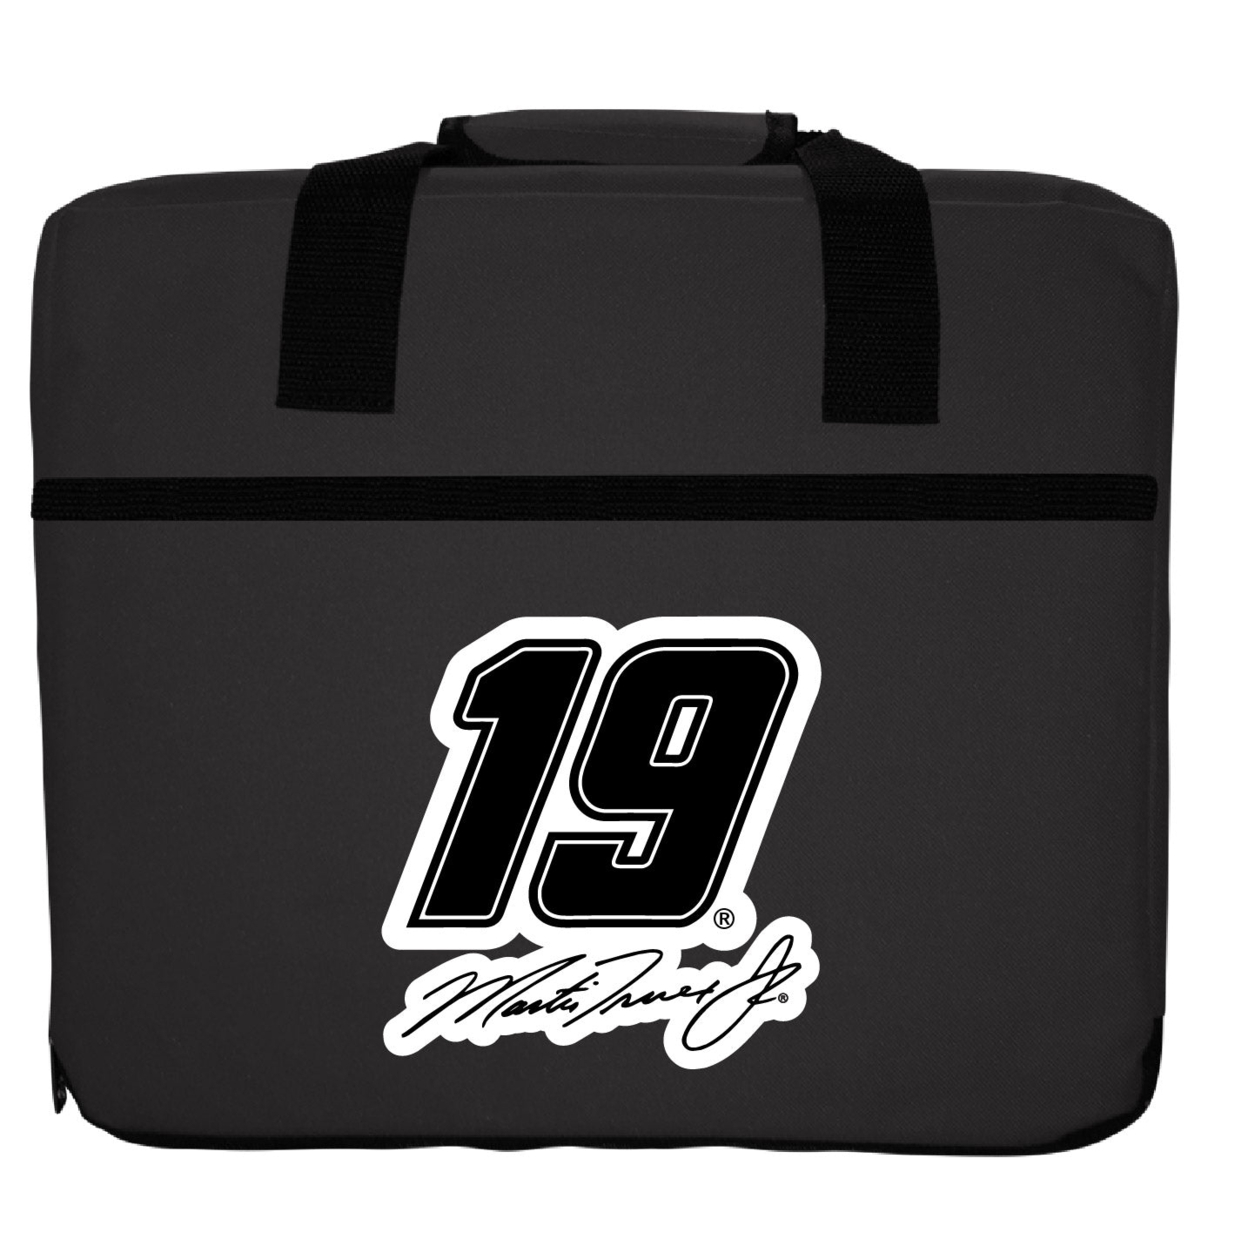 R And R Imports Officially Licensed NASCAR Martin Truex #19 Single Sided Seat Cushion New For 2020